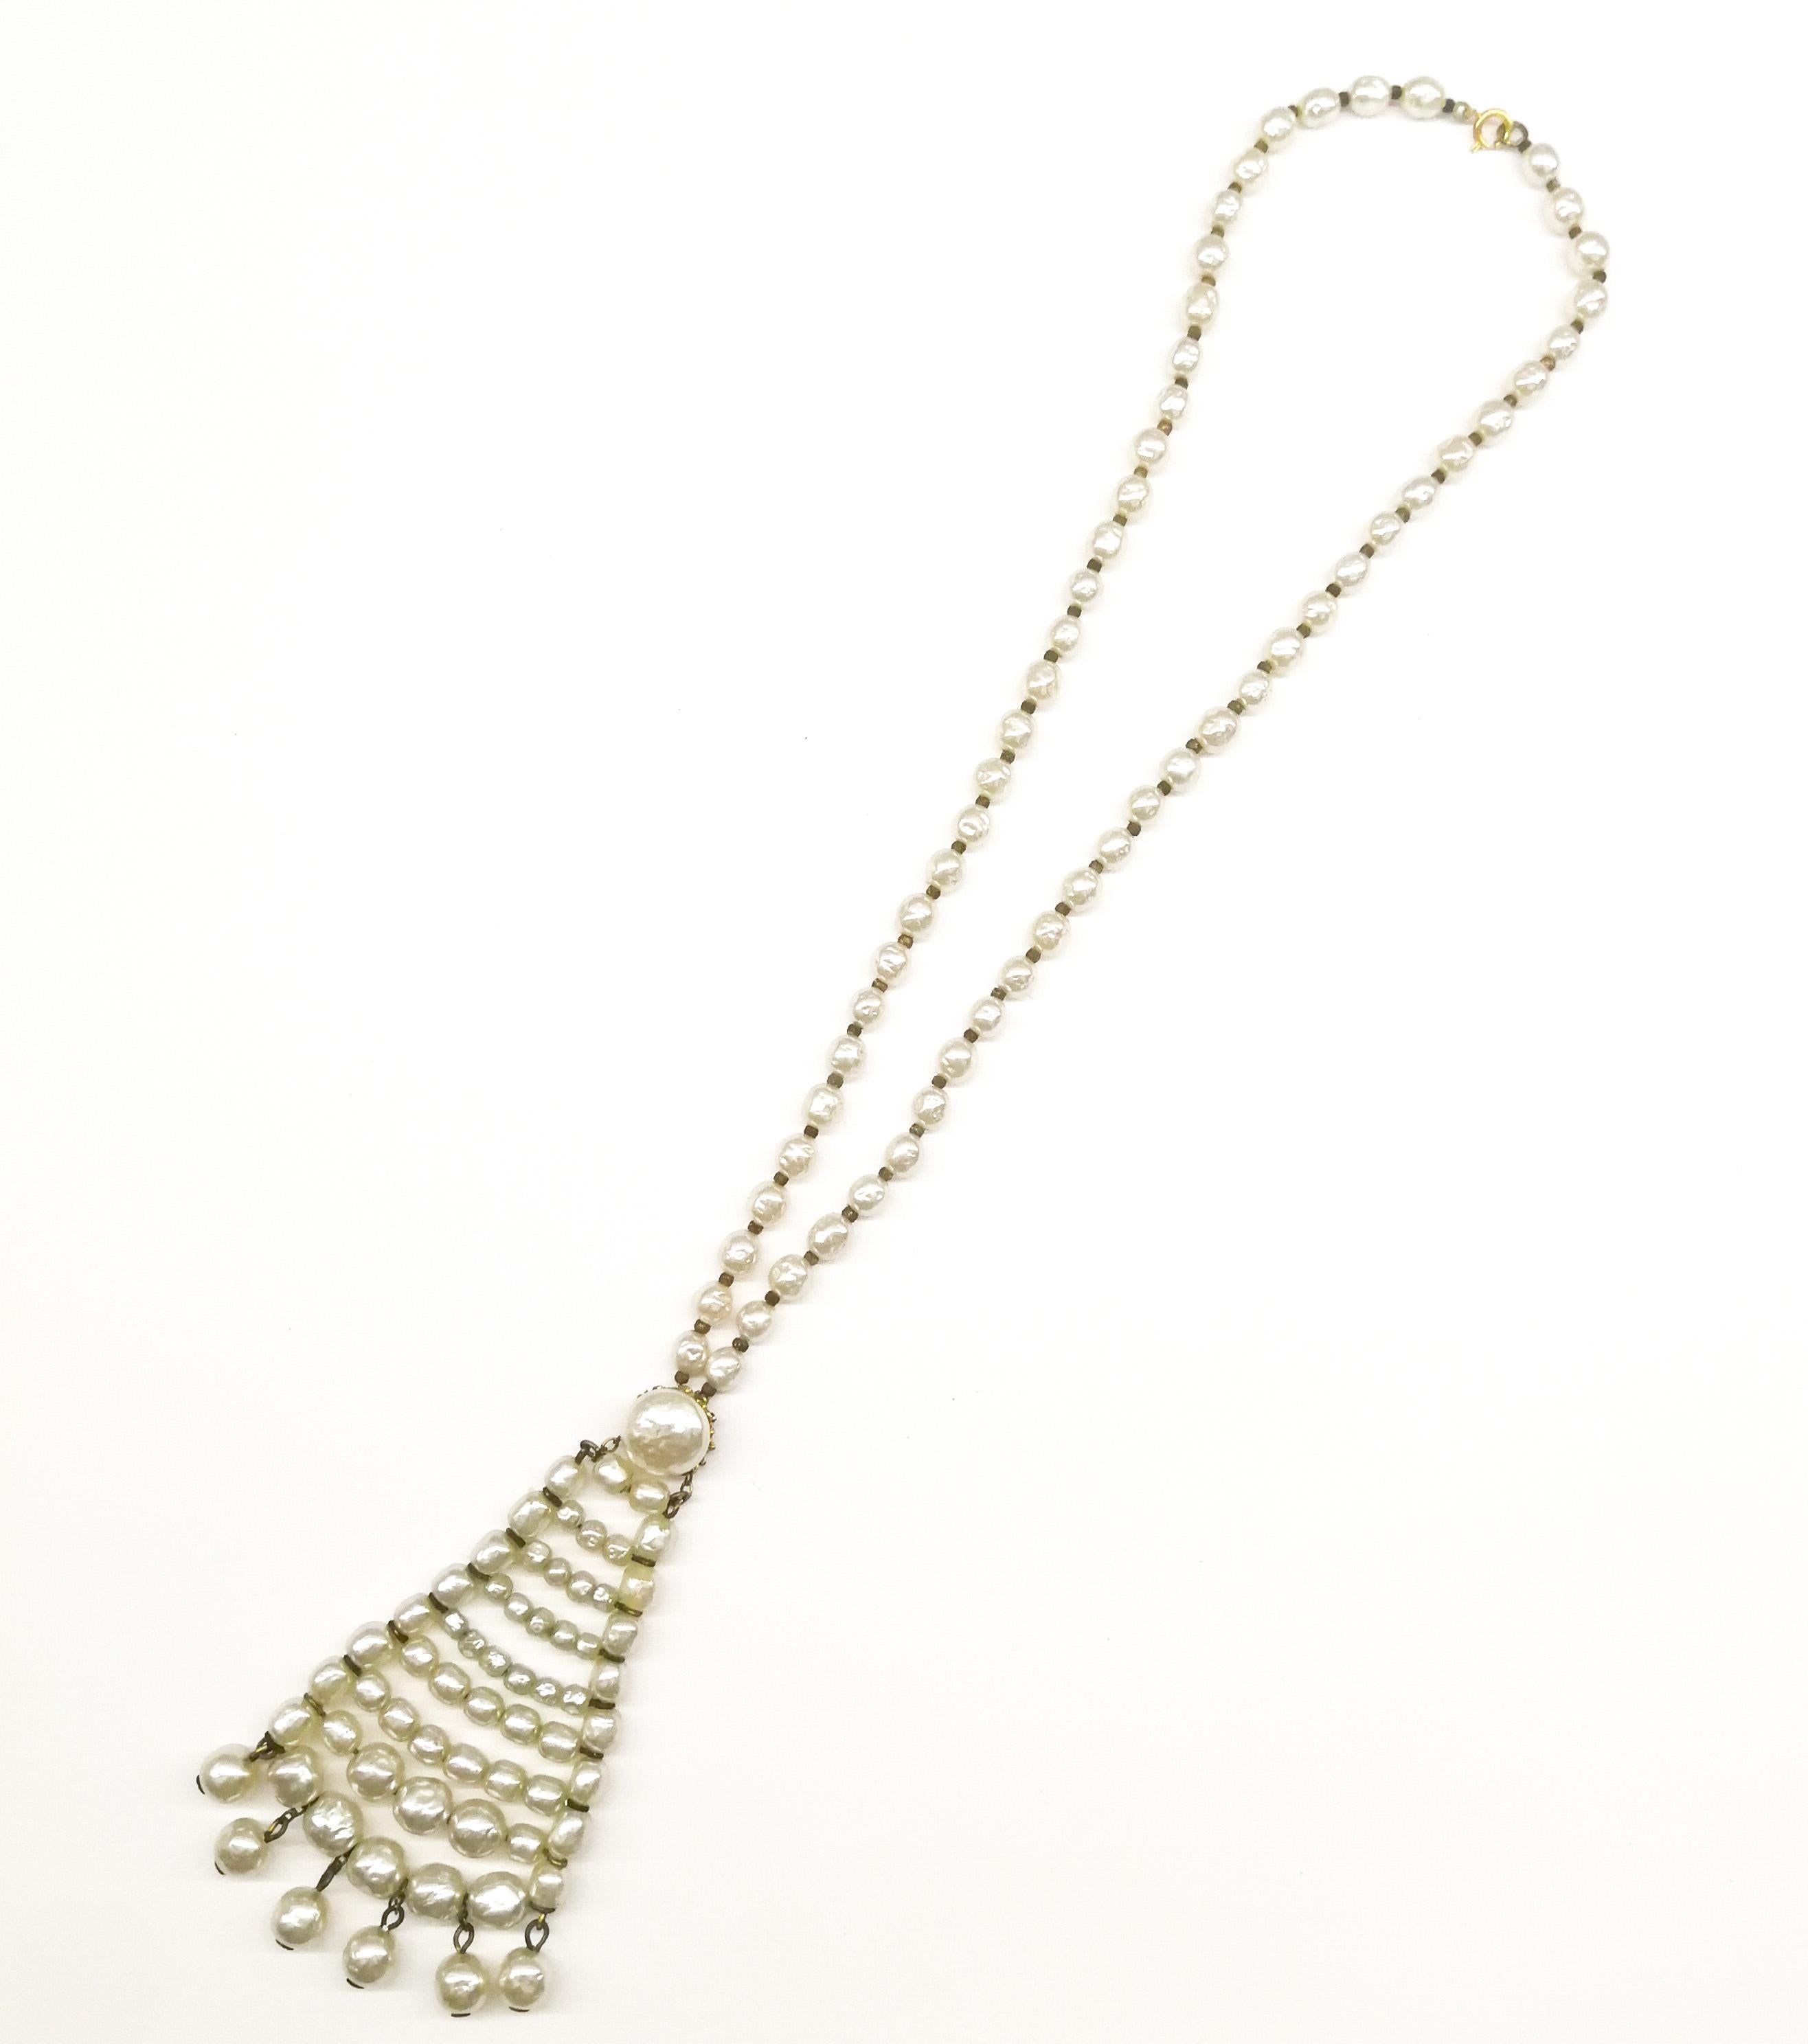 A long baroque pearl sautoir or pendant necklace, from the 1960s, made from signature Miriam Haskell glass pearls, filled with wax, to give weight, dipped in a mother of pearl solution. A single row of pearls lead down to a structured triangular